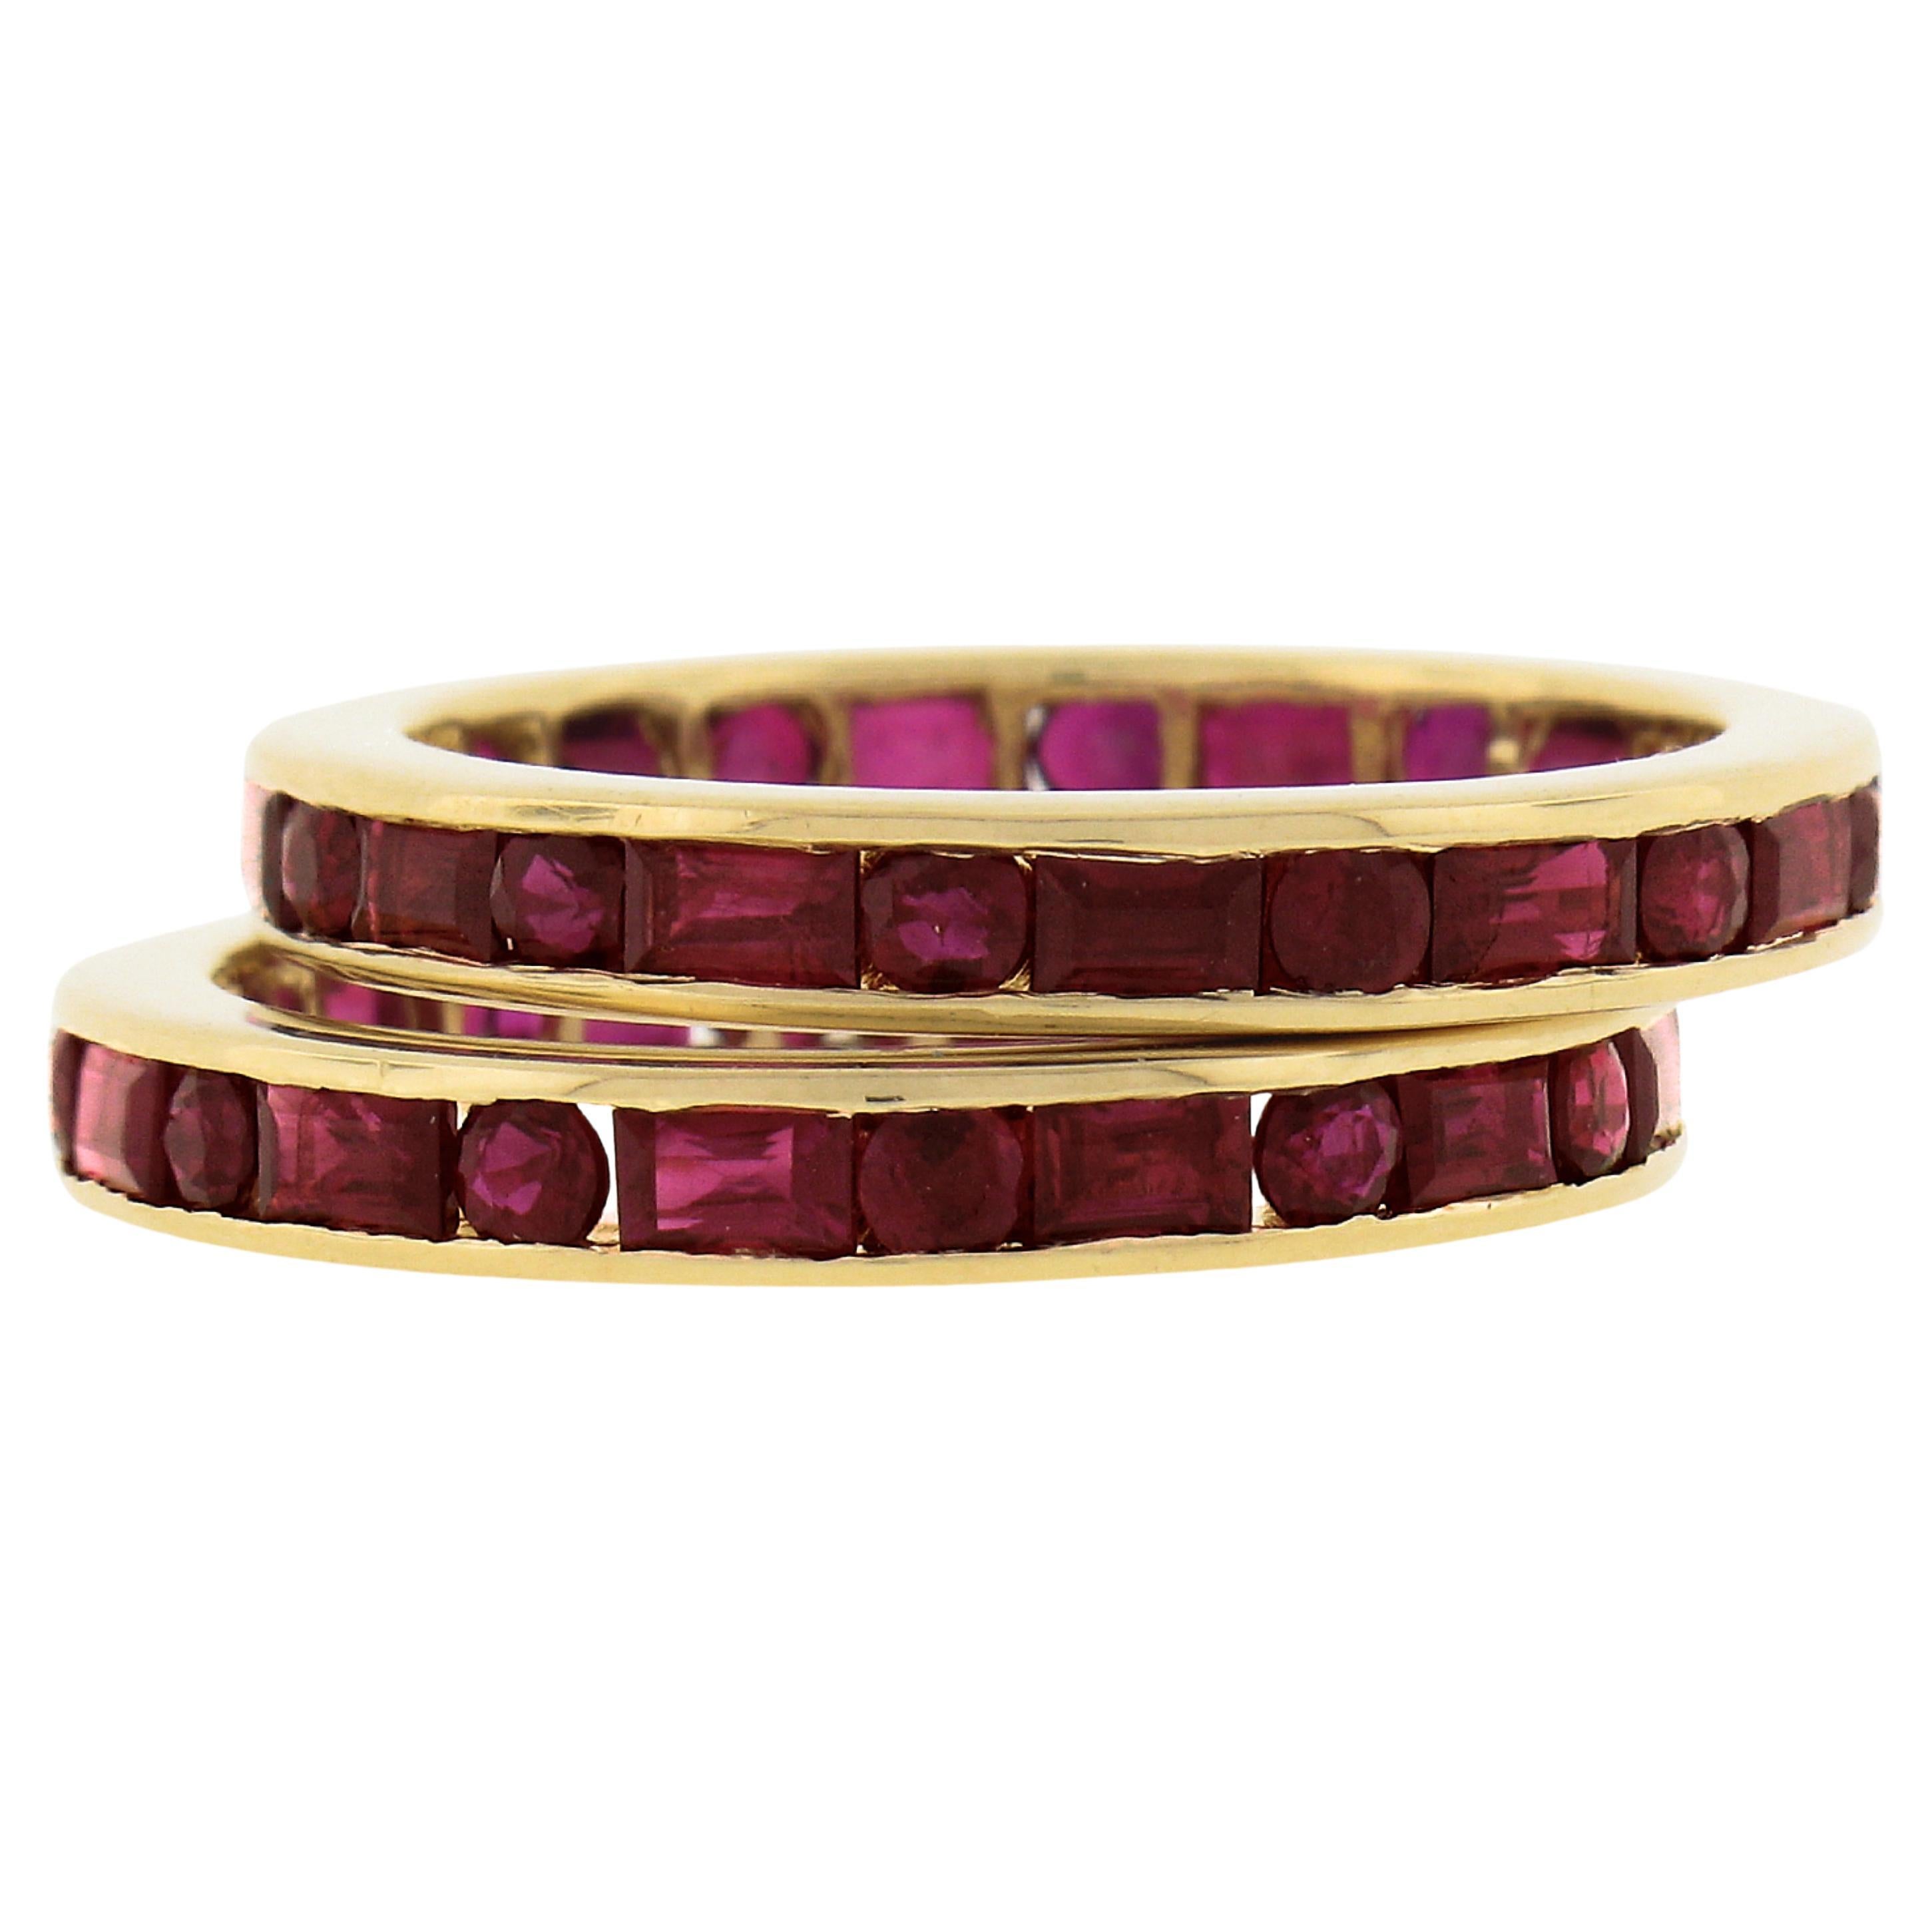 Pair of 18k Gold Channel GIA Vivid Red Burma Ruby Eternity Stack Band Guard Ring